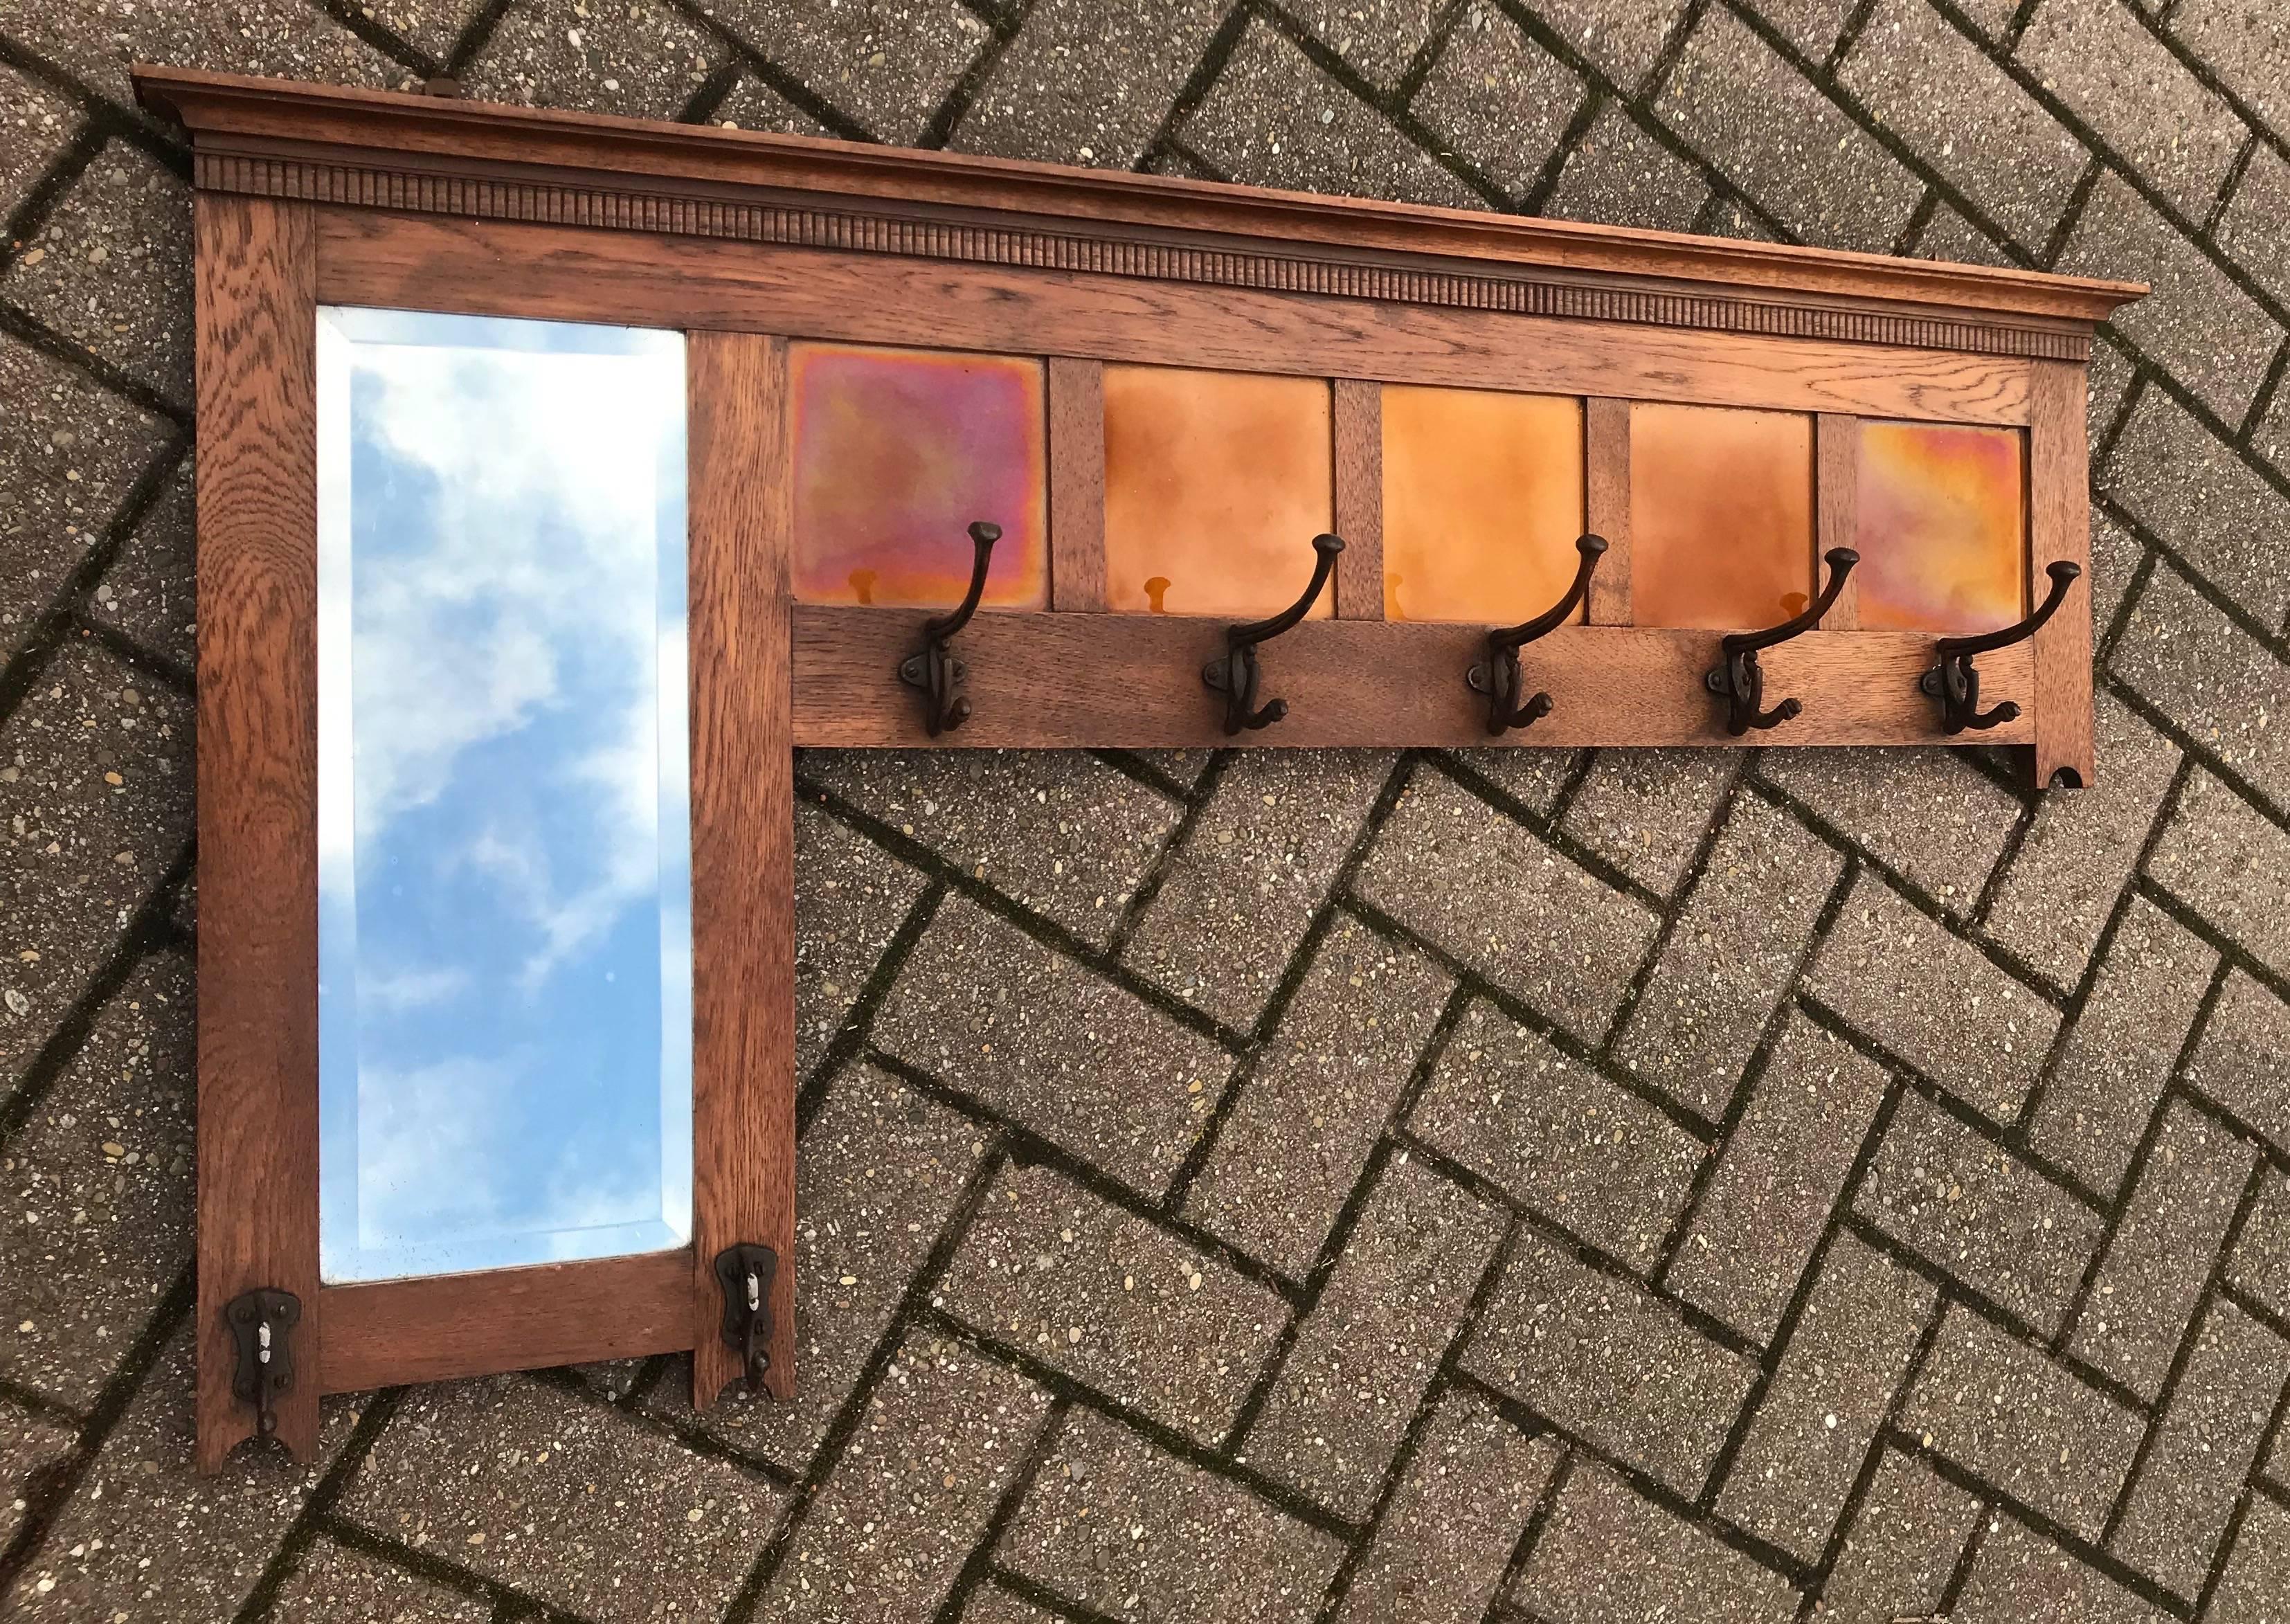 Good size Arts and Crafts wall coat rack. 

This rare and stylish Arts and Crafts coat rack is entirely original and in very good condition. This top quality coat rack is handcrafted from solid oak. The inlaid Majolica glazed tiles have a beautiful,